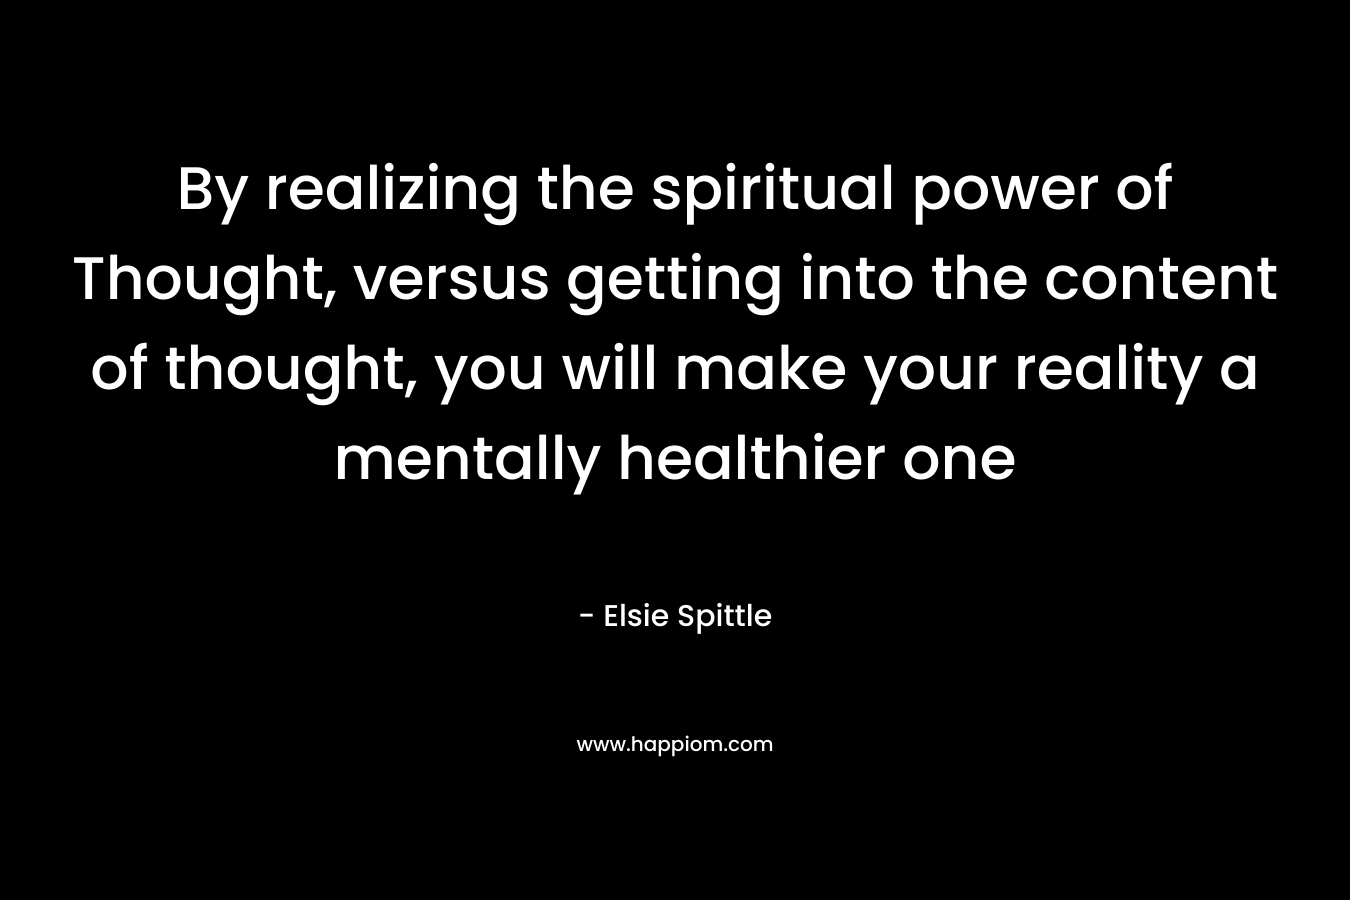 By realizing the spiritual power of Thought, versus getting into the content of thought, you will make your reality a mentally healthier one – Elsie Spittle